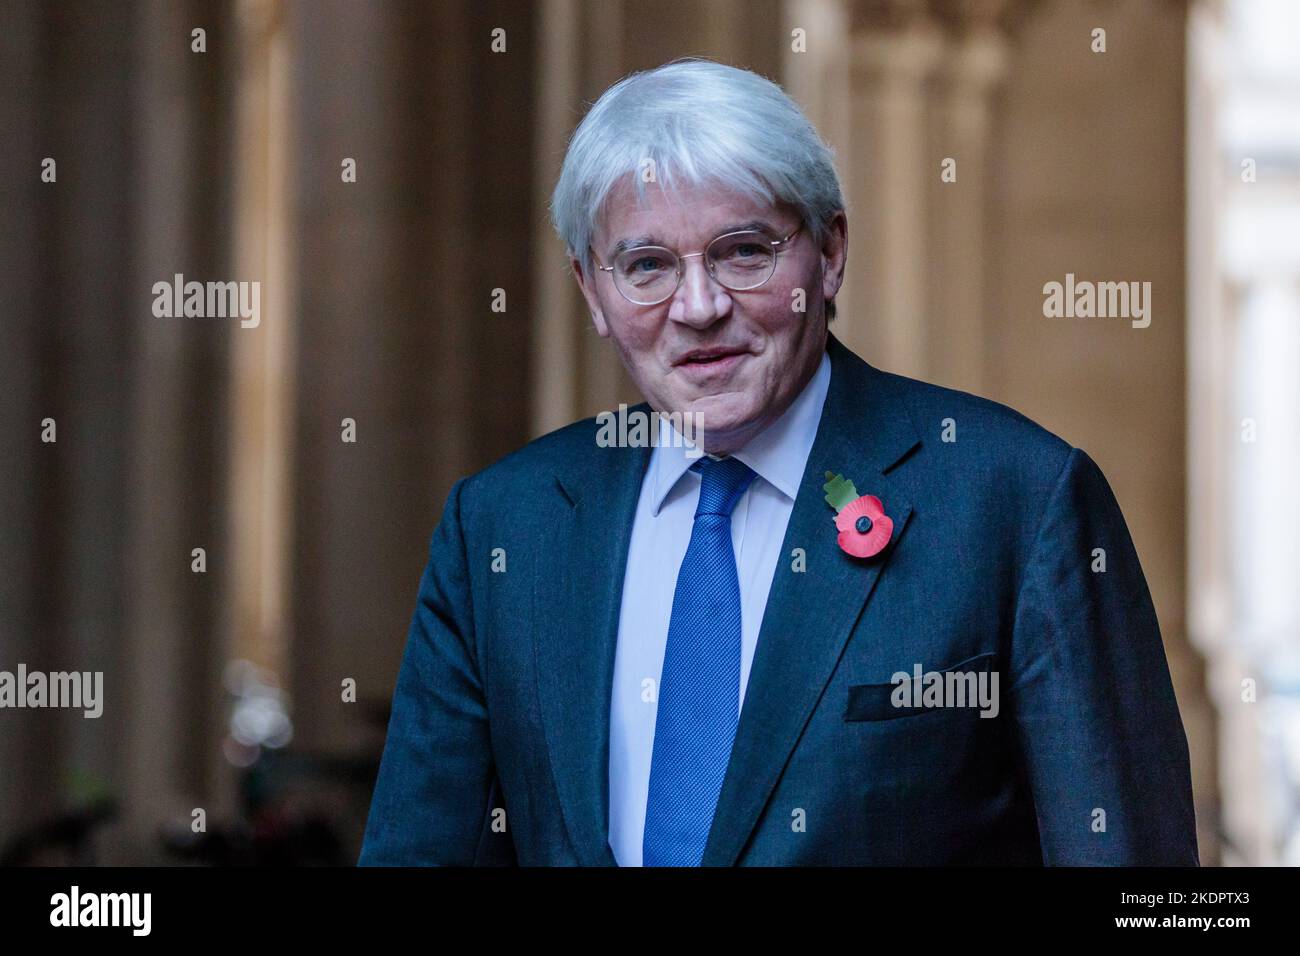 Downing Street, London, UK. 8th November 2022.  Andrew Mitchell MP, Minister of State (Minister for Development) in the Foreign, Commonwealth and Development Office, attends the weekly Cabinet Meeting at 10 Downing Street. Photo by Amanda Rose/Alamy Live News Stock Photo